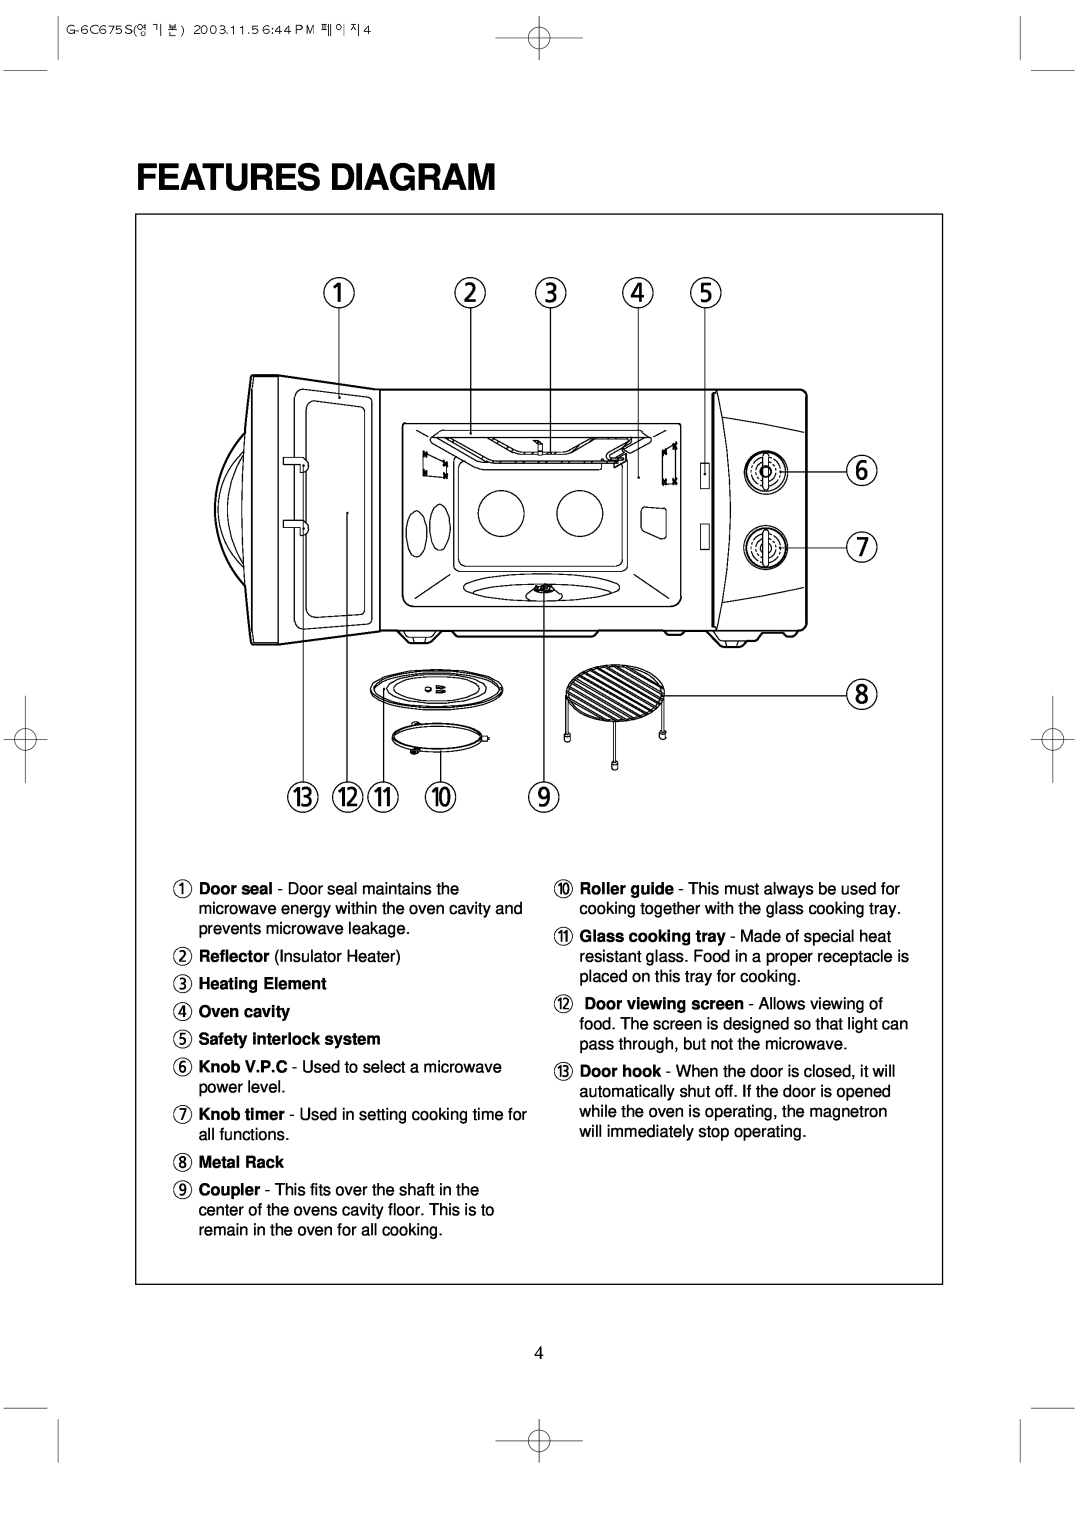 Daewoo KOG-3C675S manual Features Diagram, 1 2, e wq, Heating Element 4 Oven cavity 5 Safety interlock system, Metal Rack 